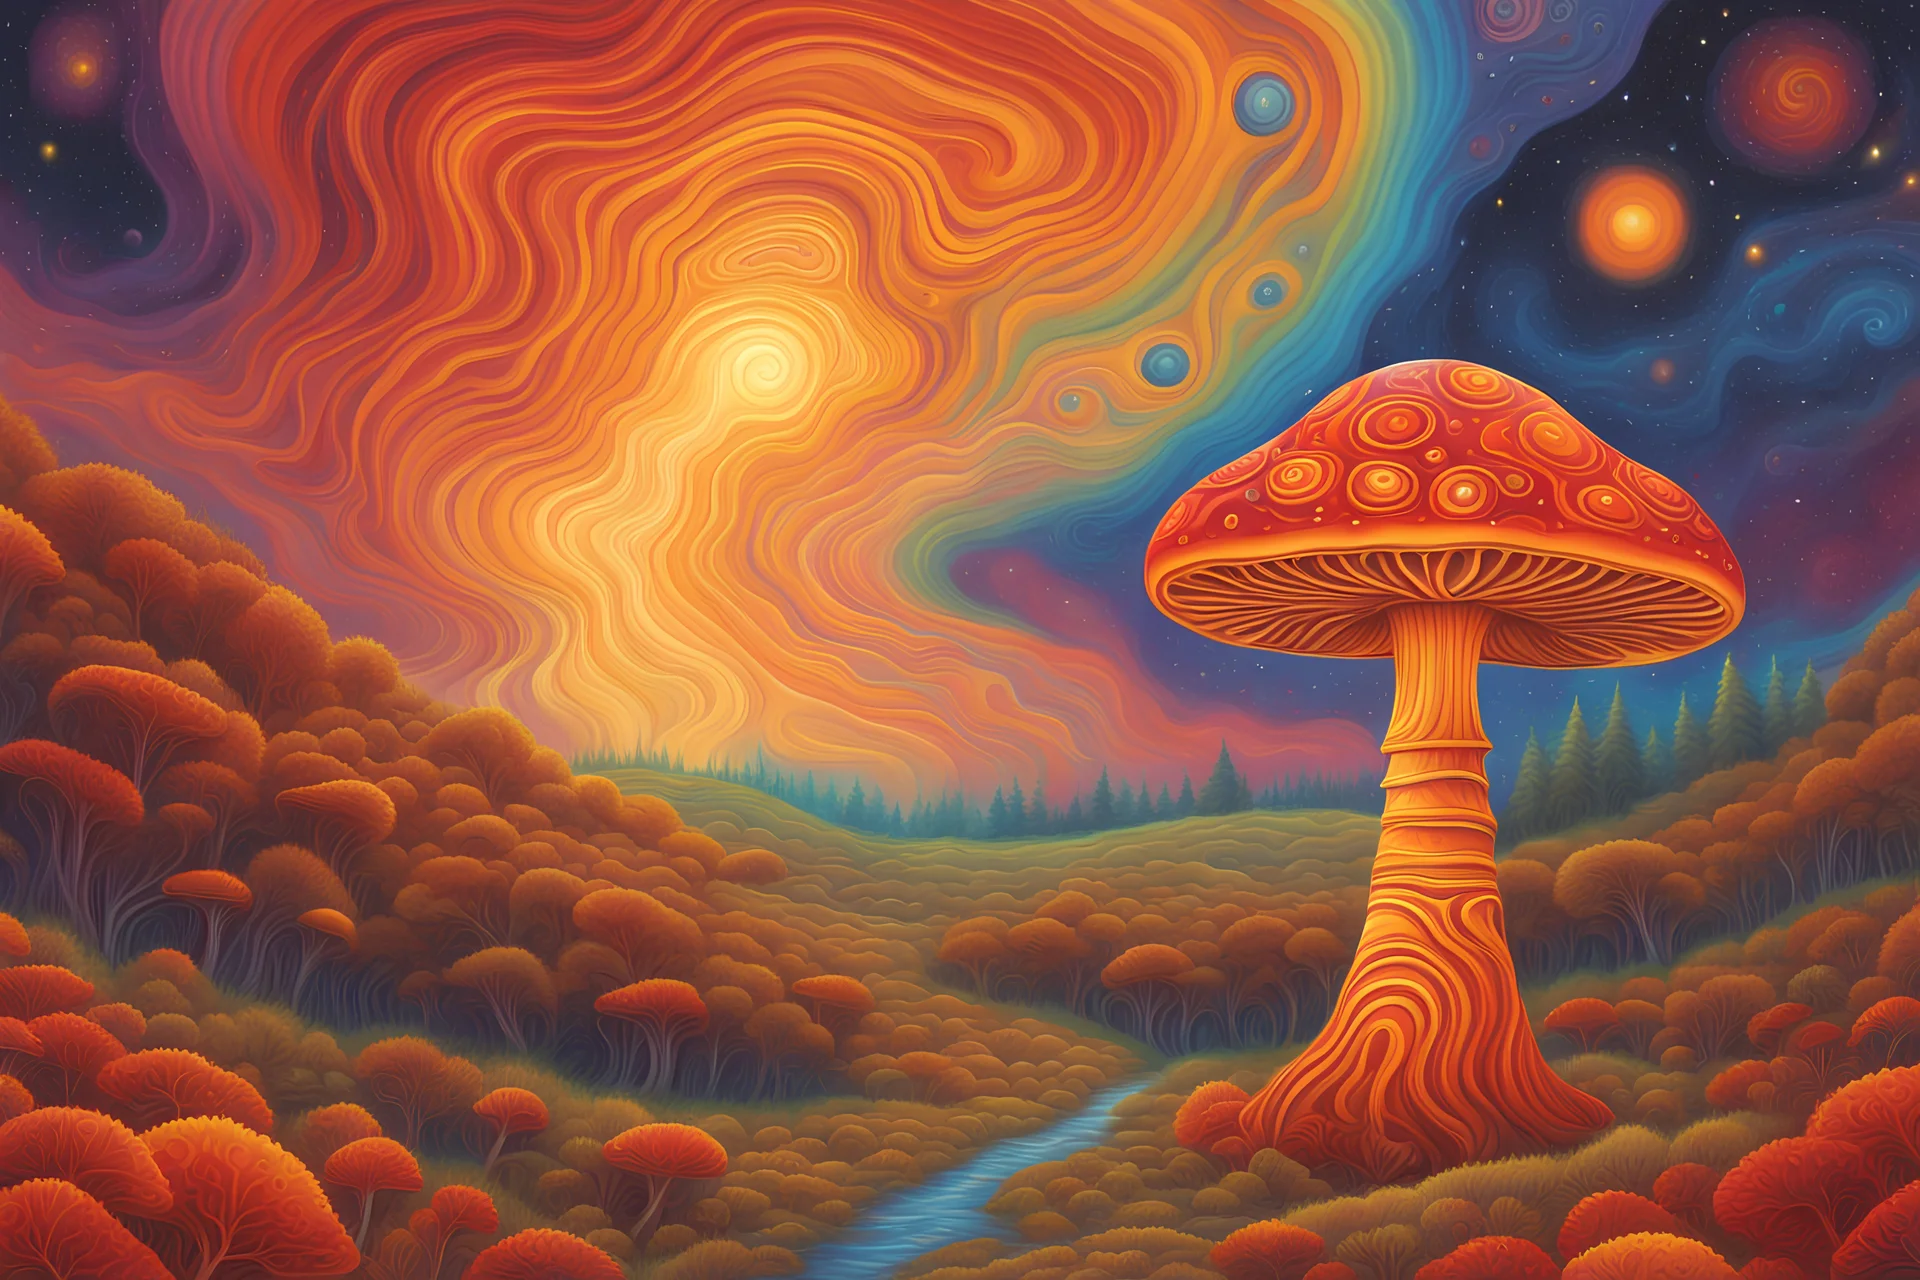 cosmic mushroom galaxy in a psychedelic orange, red, and yellow color palette in the illustrated style of alex grey